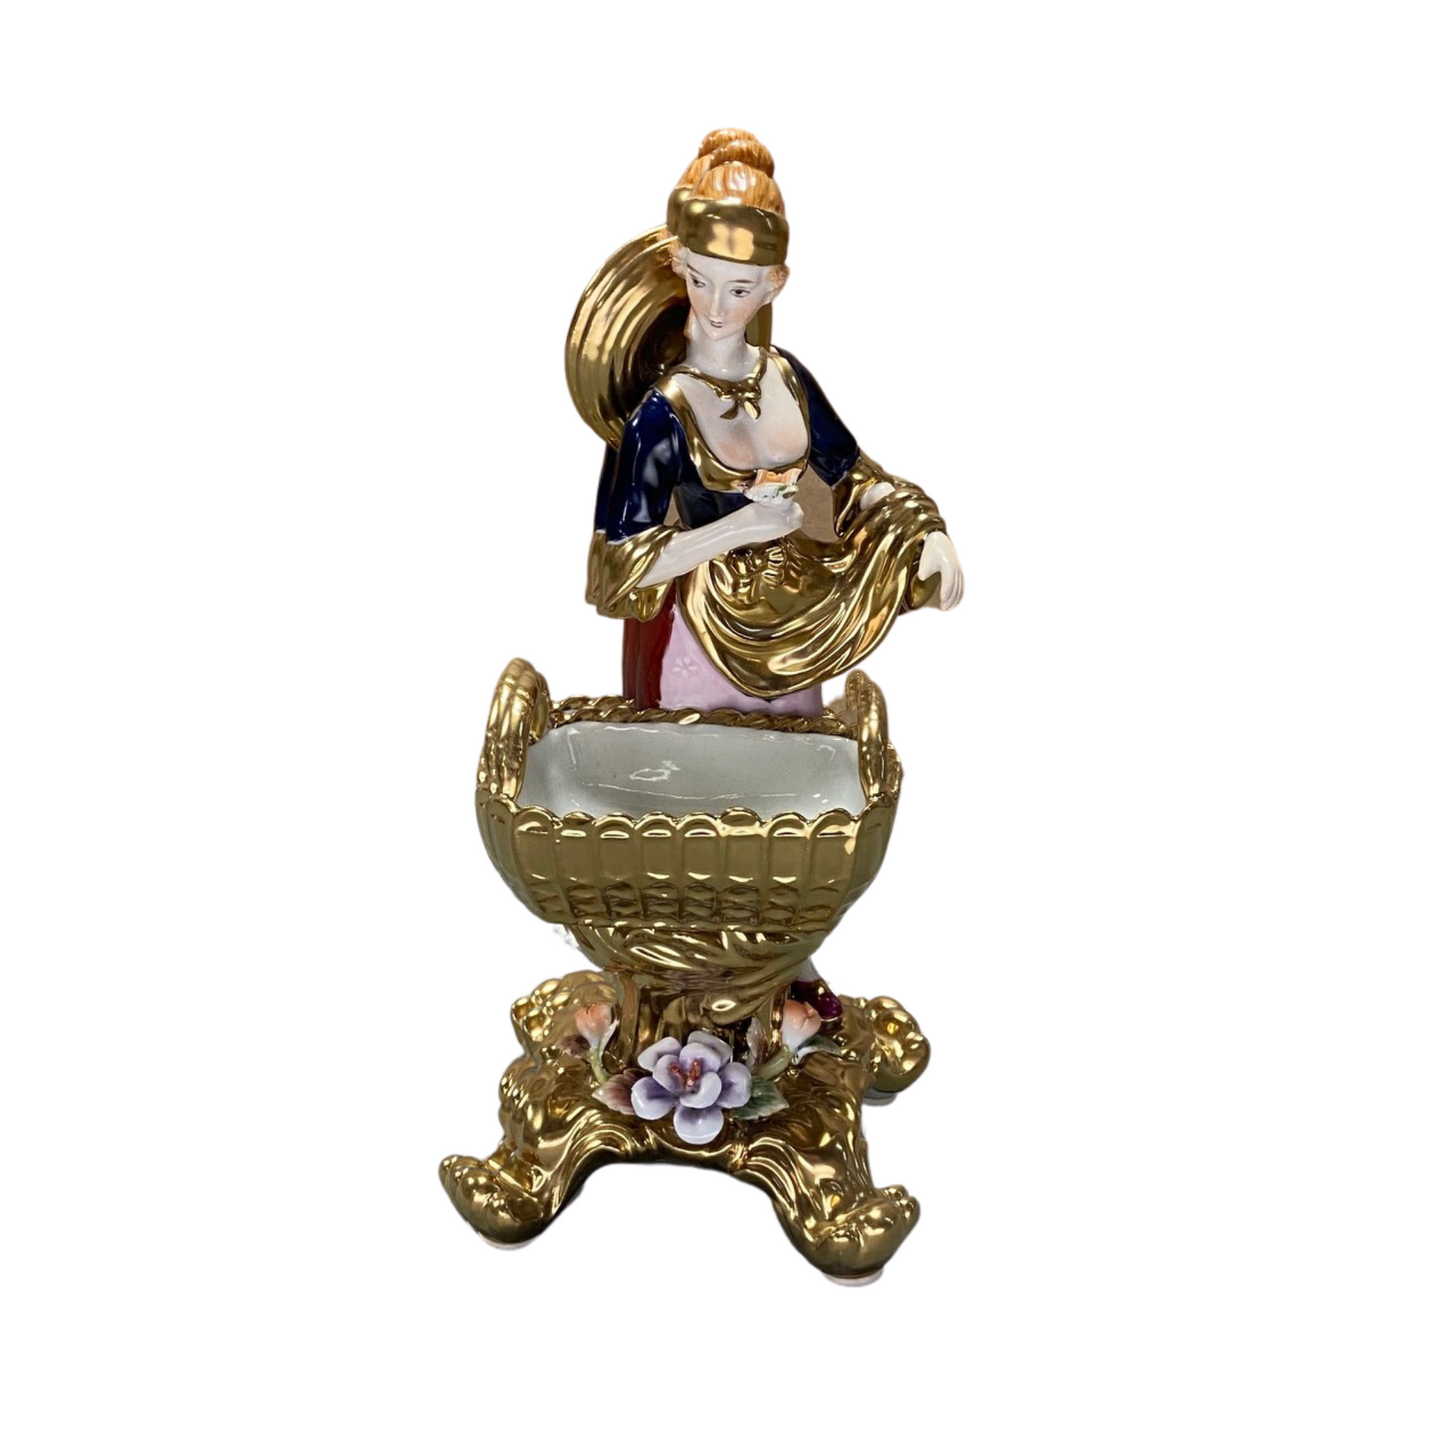 Mom With A Baby Carriage Porcelain Figurine